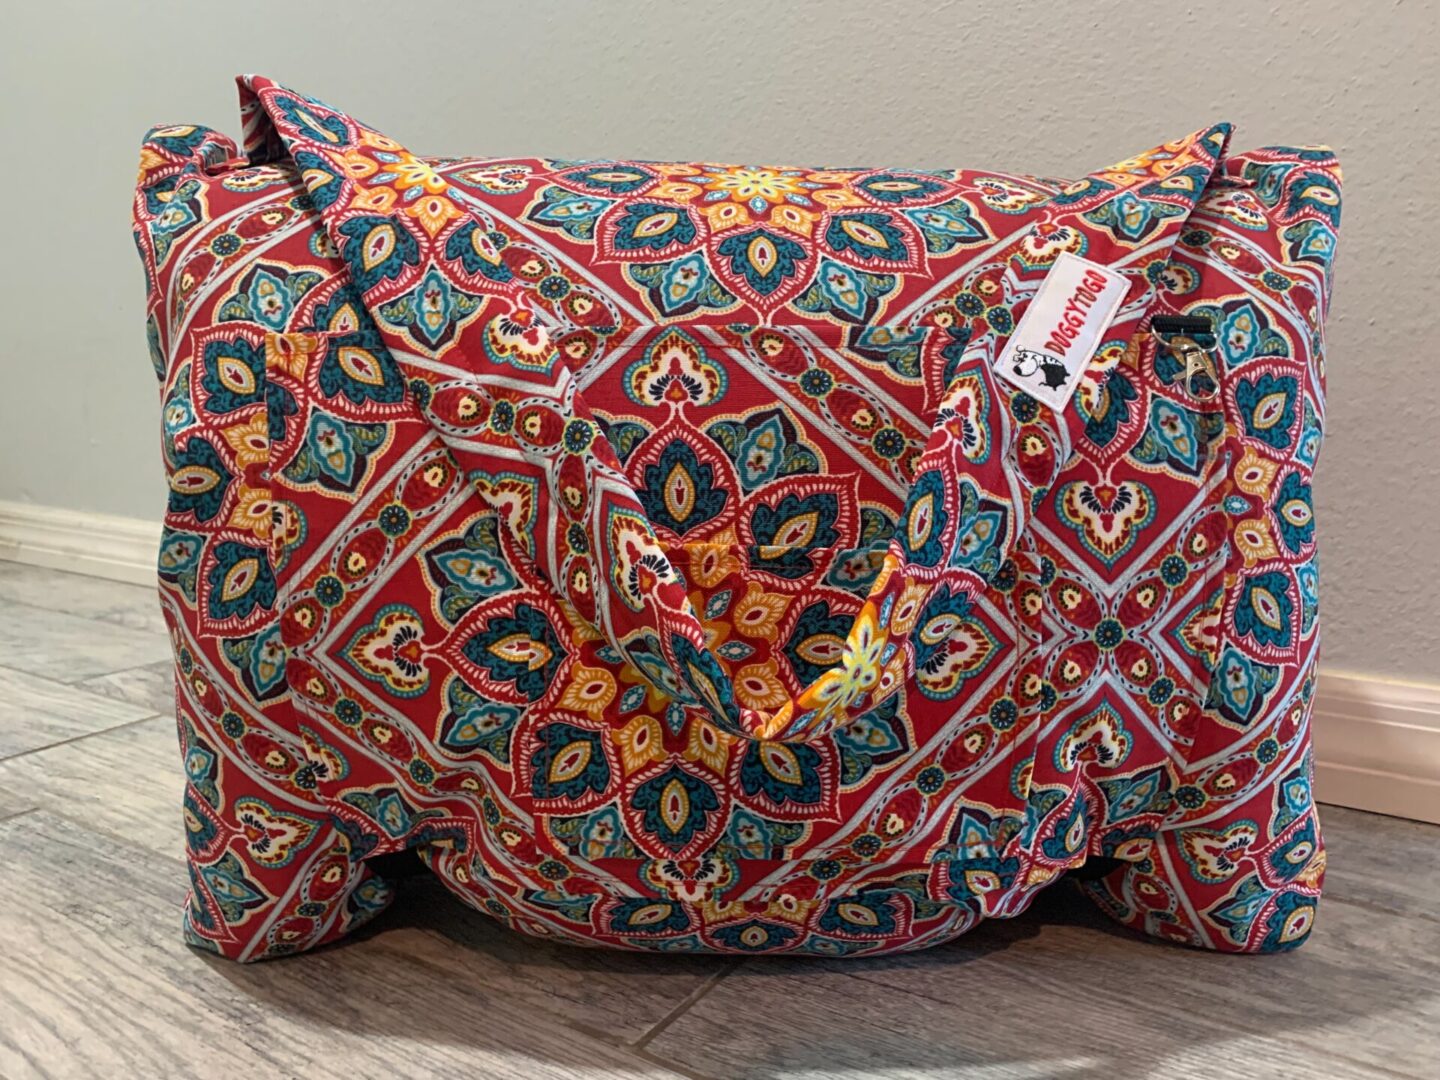 A dog bed bag with a multicolor pattern printed on it